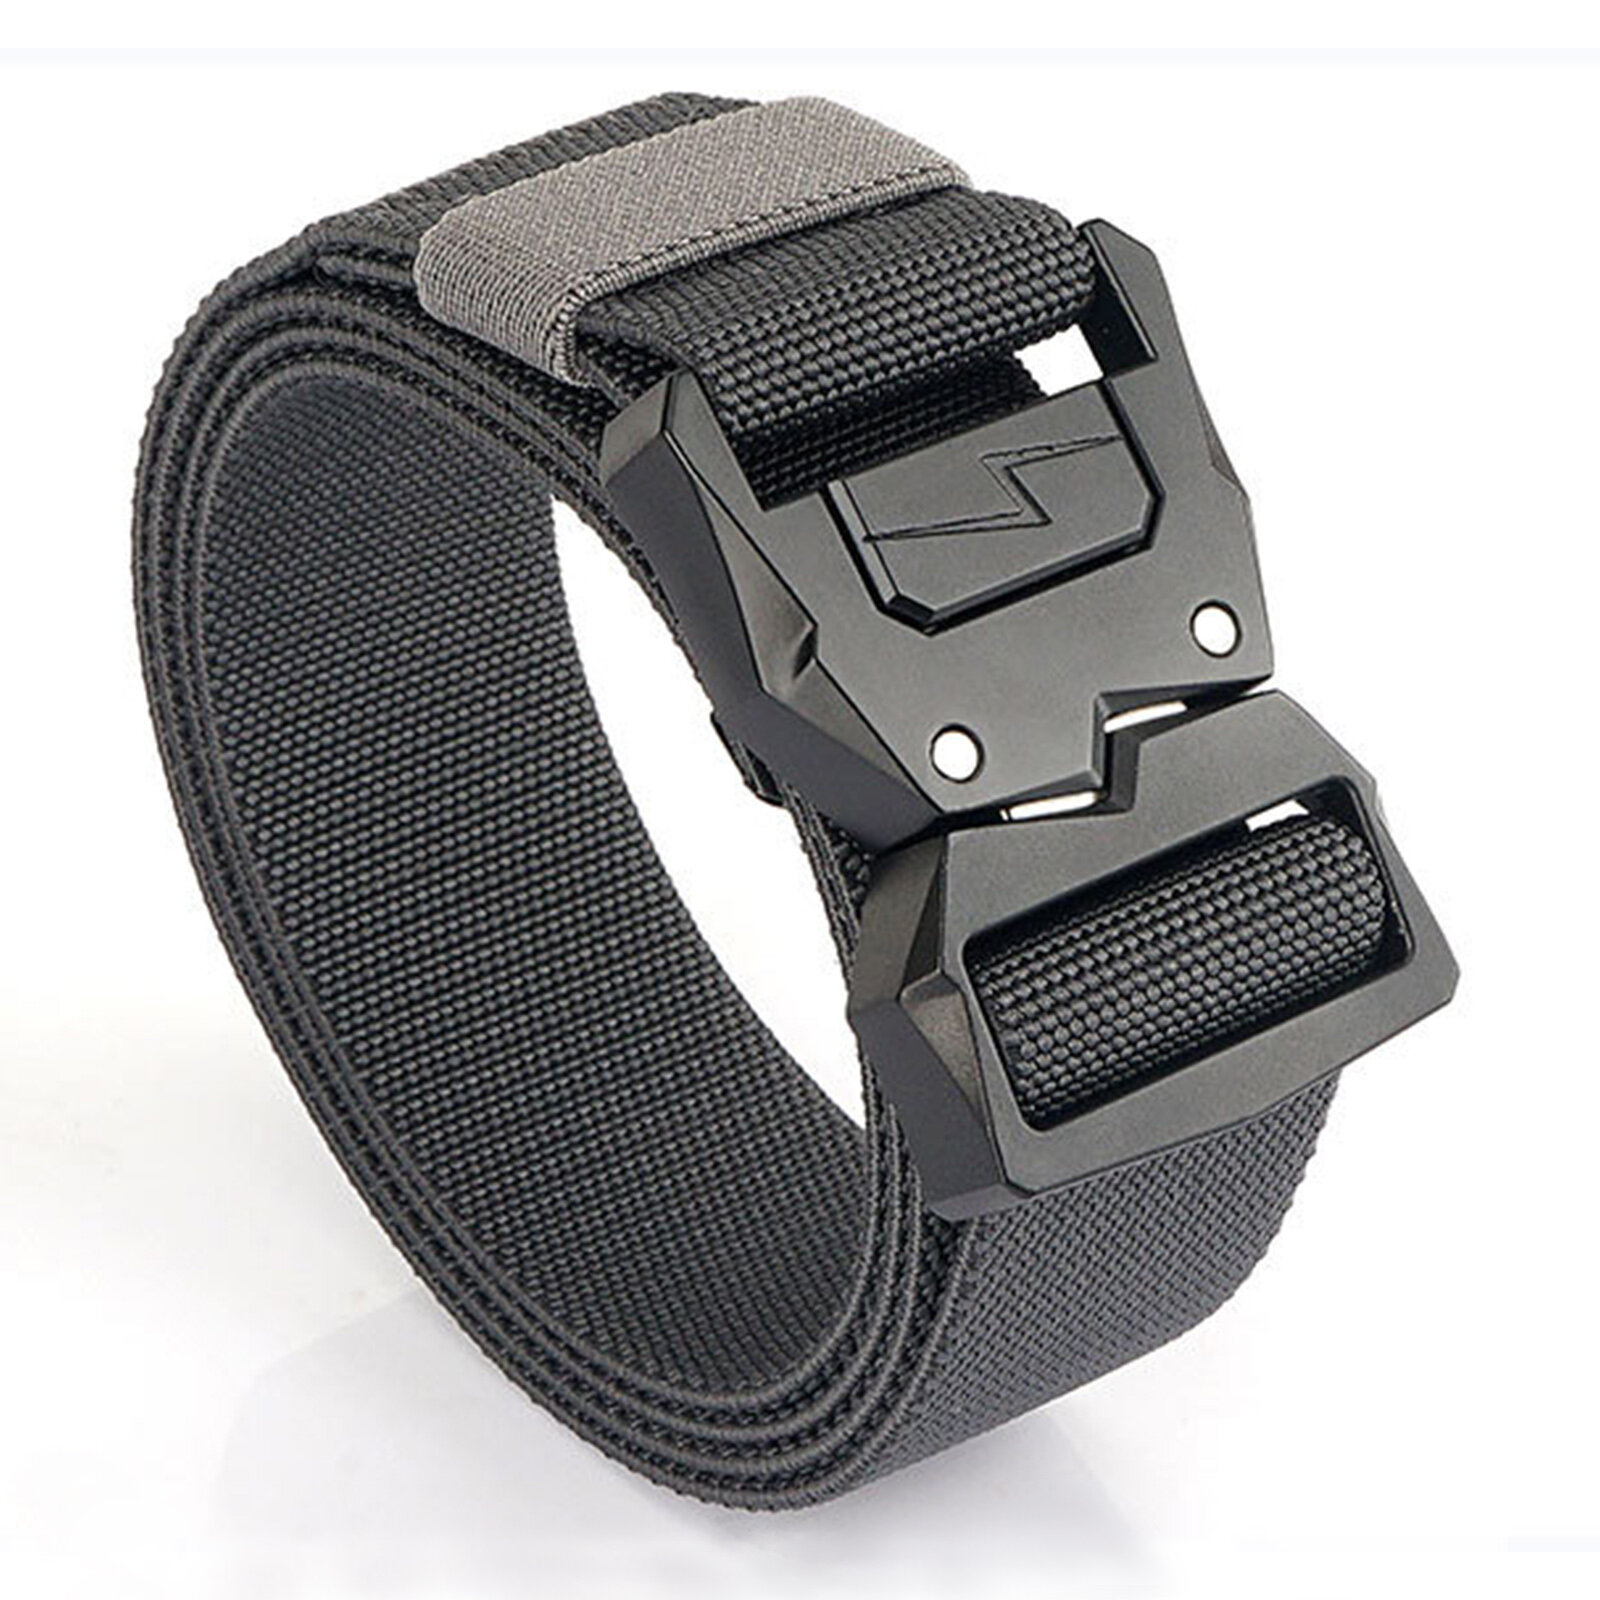 Men 125cm Nylon Breathable Tactical Belt Military Hiking Rigger Web Work Belt with Heavy Duty Quick 